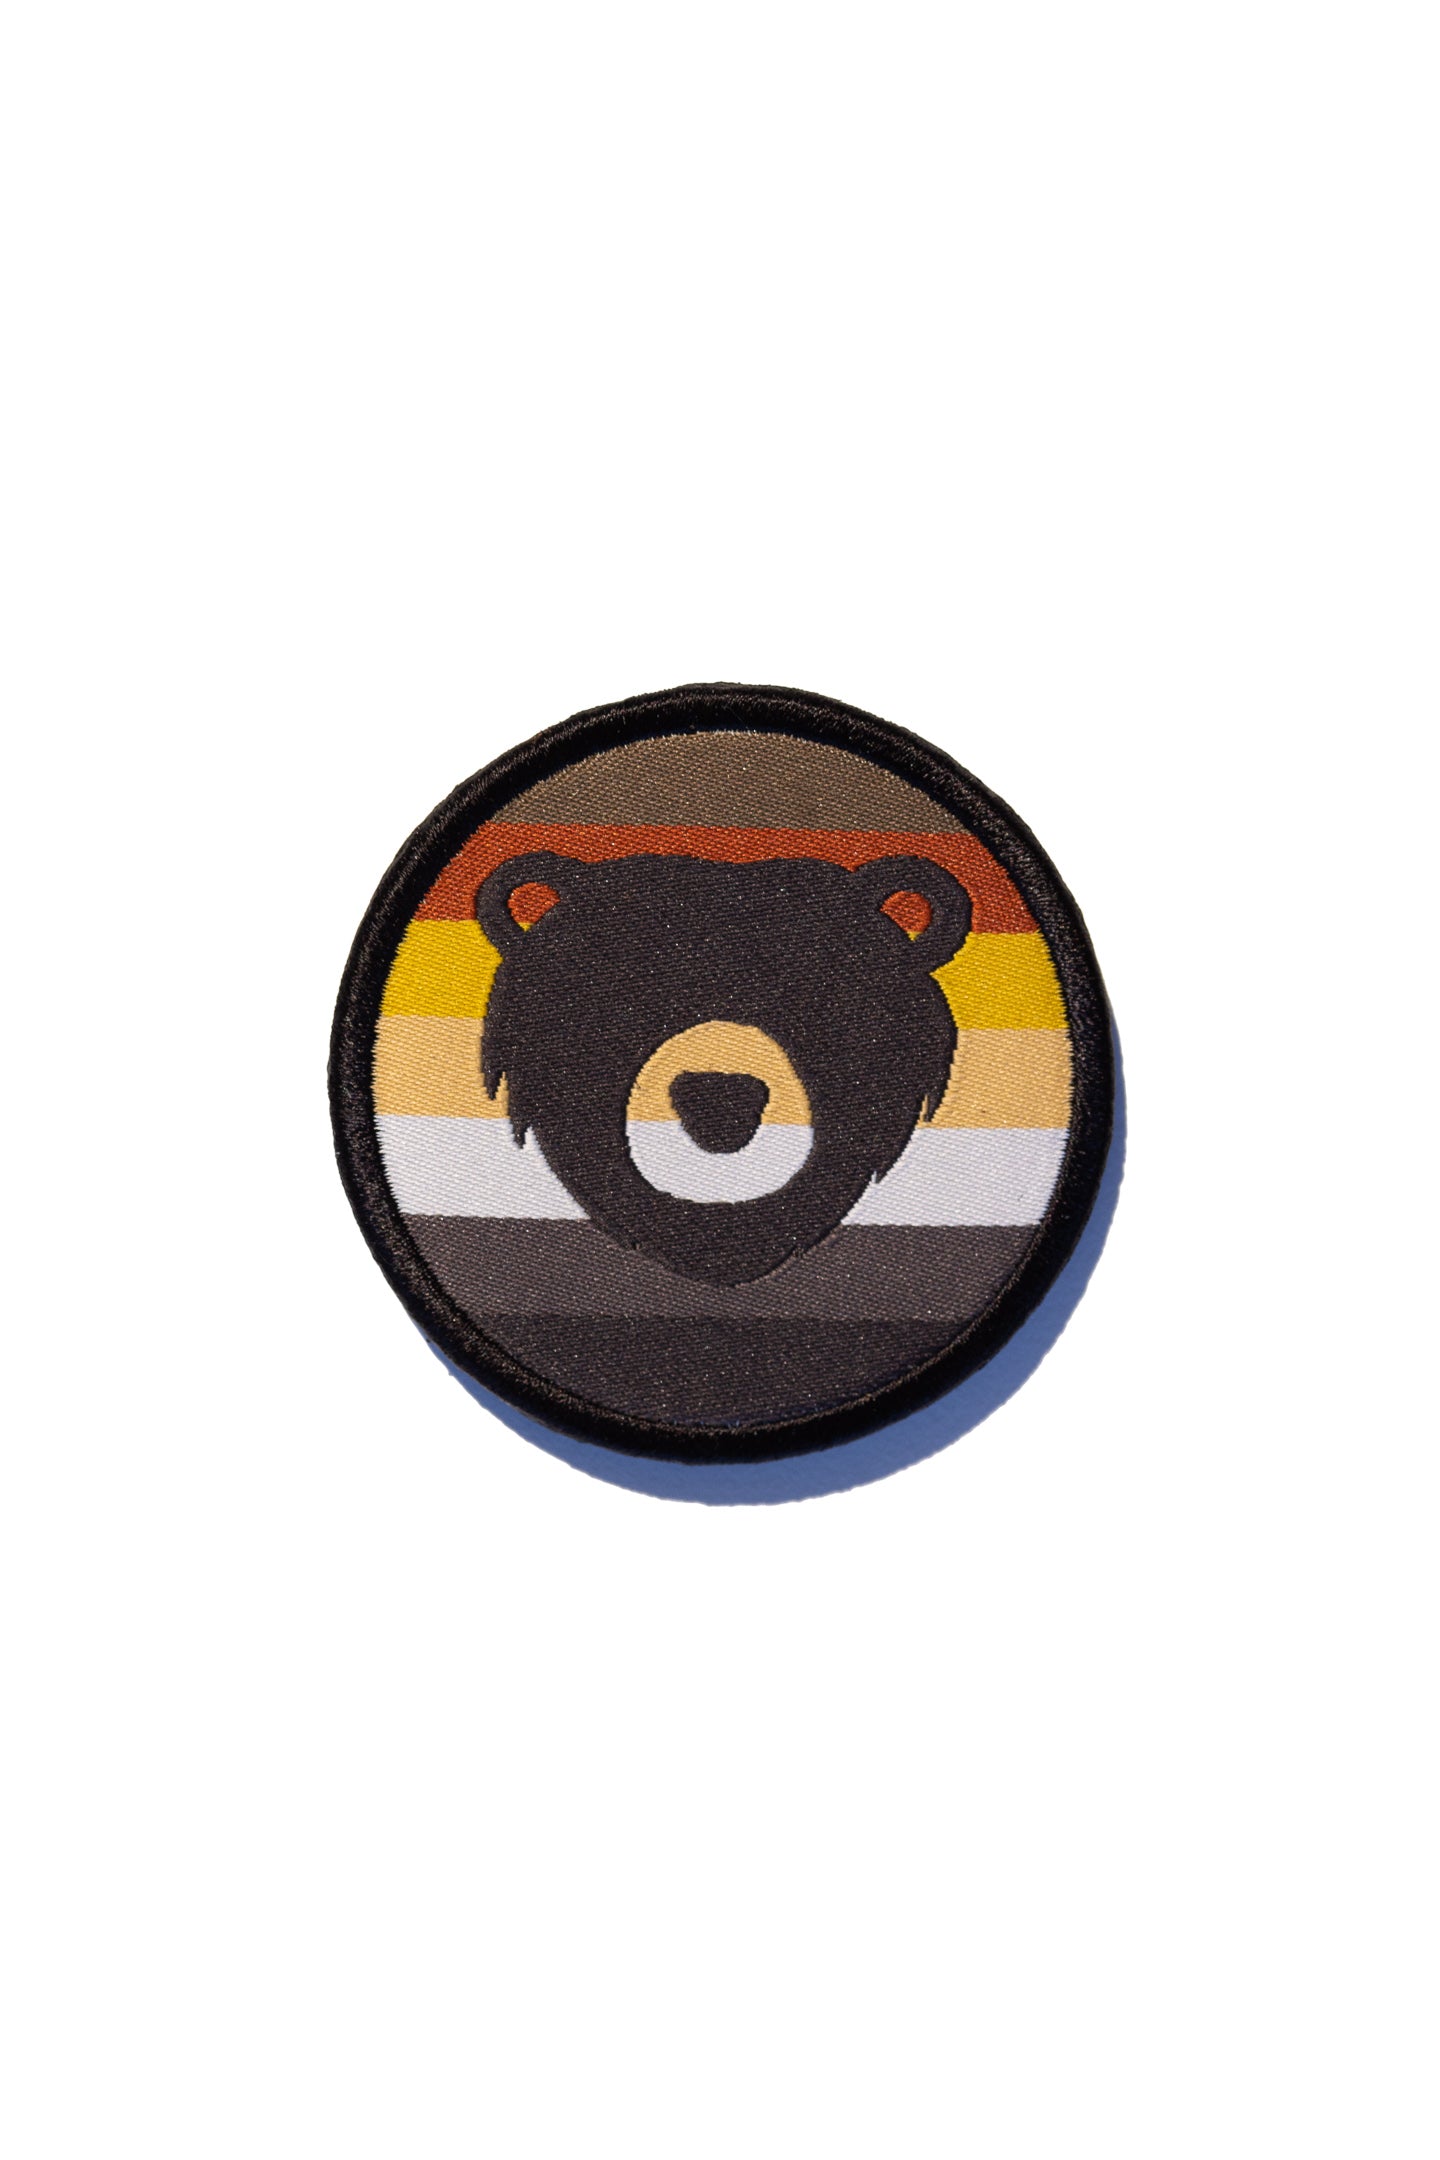 BEAR ICON; SOUNDOFF X MR 2.5" WOVEN DECAL PATCH